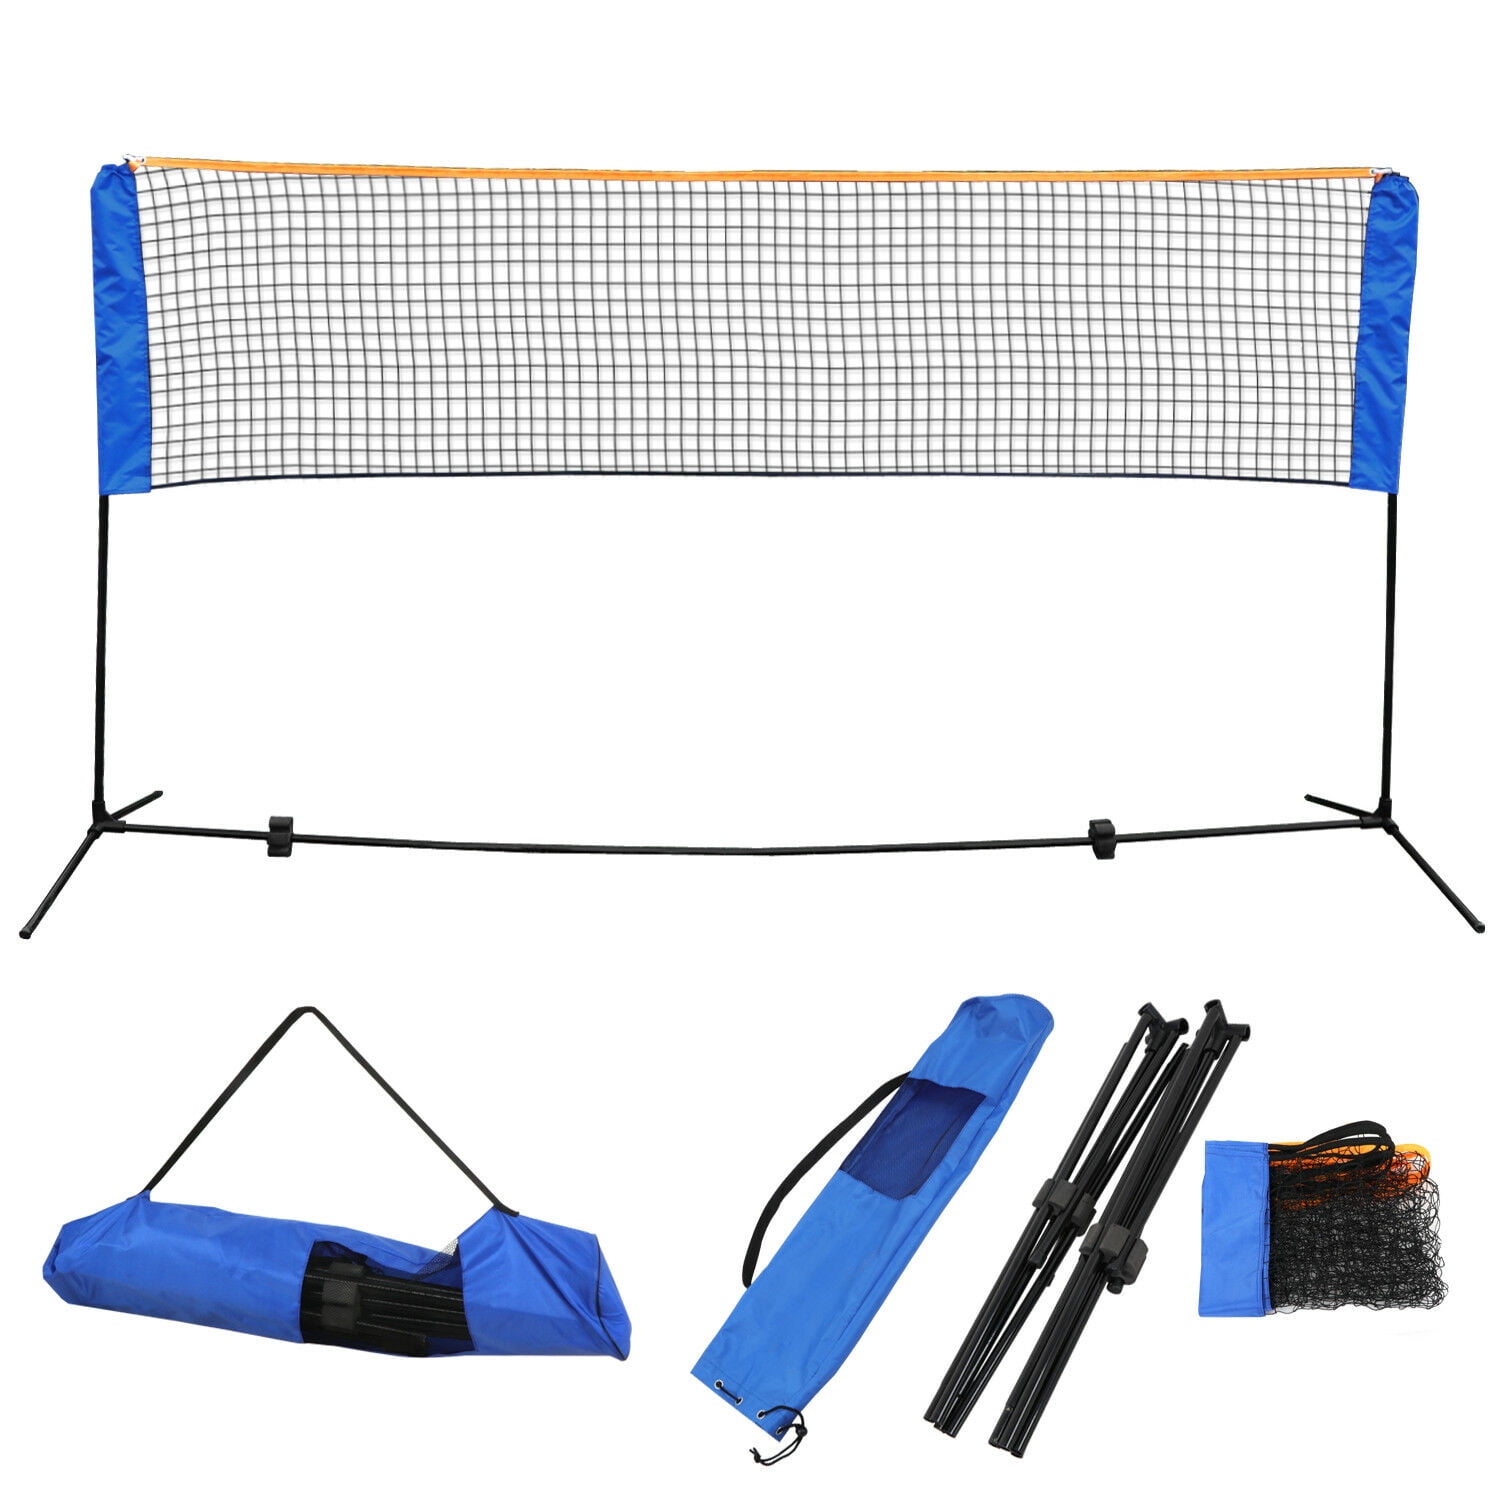 Details about   Volleyball Tennis Net Set with Stand Frame Carry Bag 10 Feet Portable Badminton 